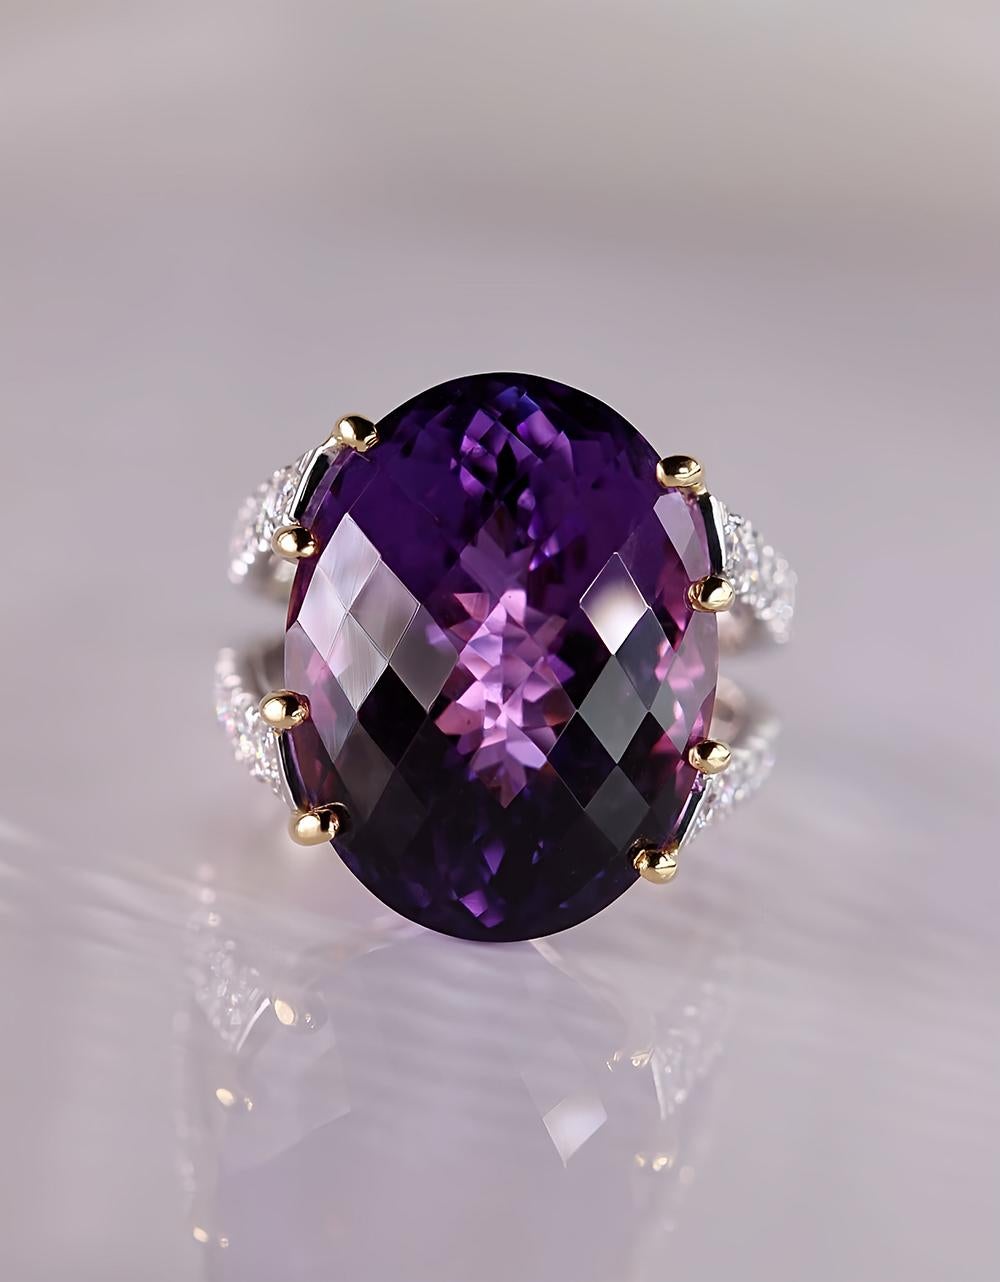 Contemporary Statement 39.25 ct Amethyst & 1.03 ct Diamond Ring in Elegant 18kt White & Yello For Sale